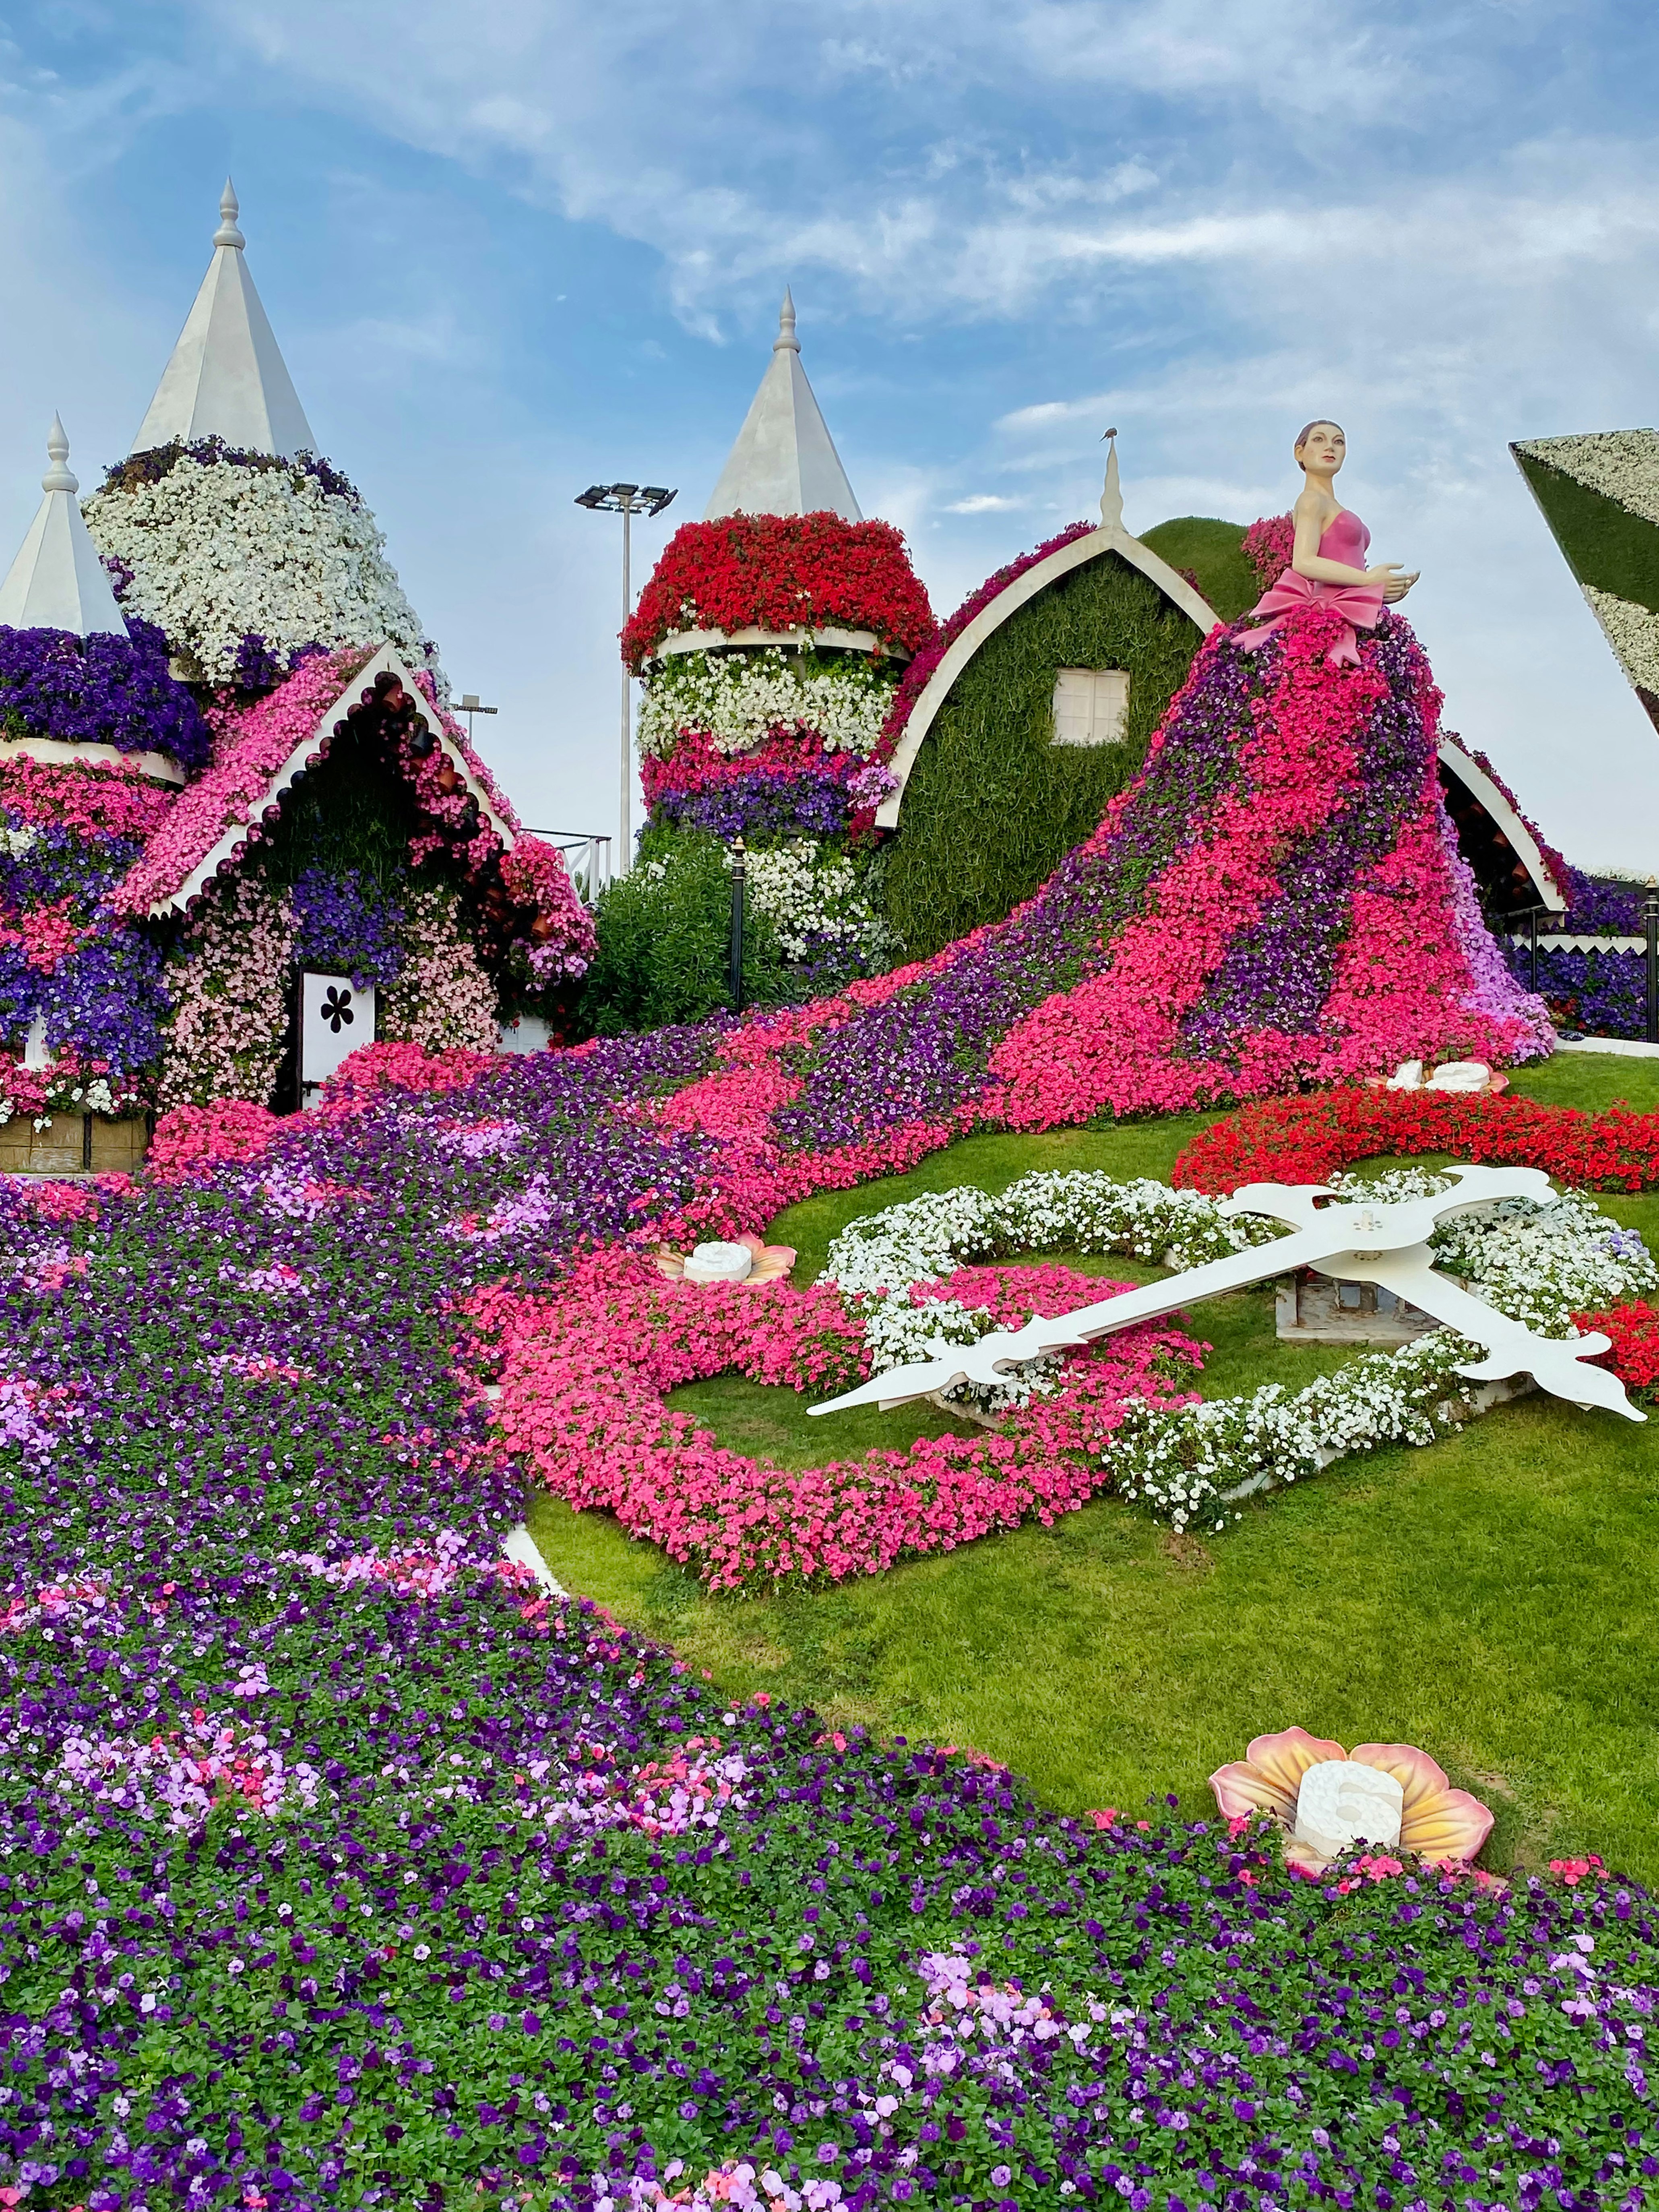 The beautiful Miracle Garden in Dubai. Best attraction in this Valentine season.